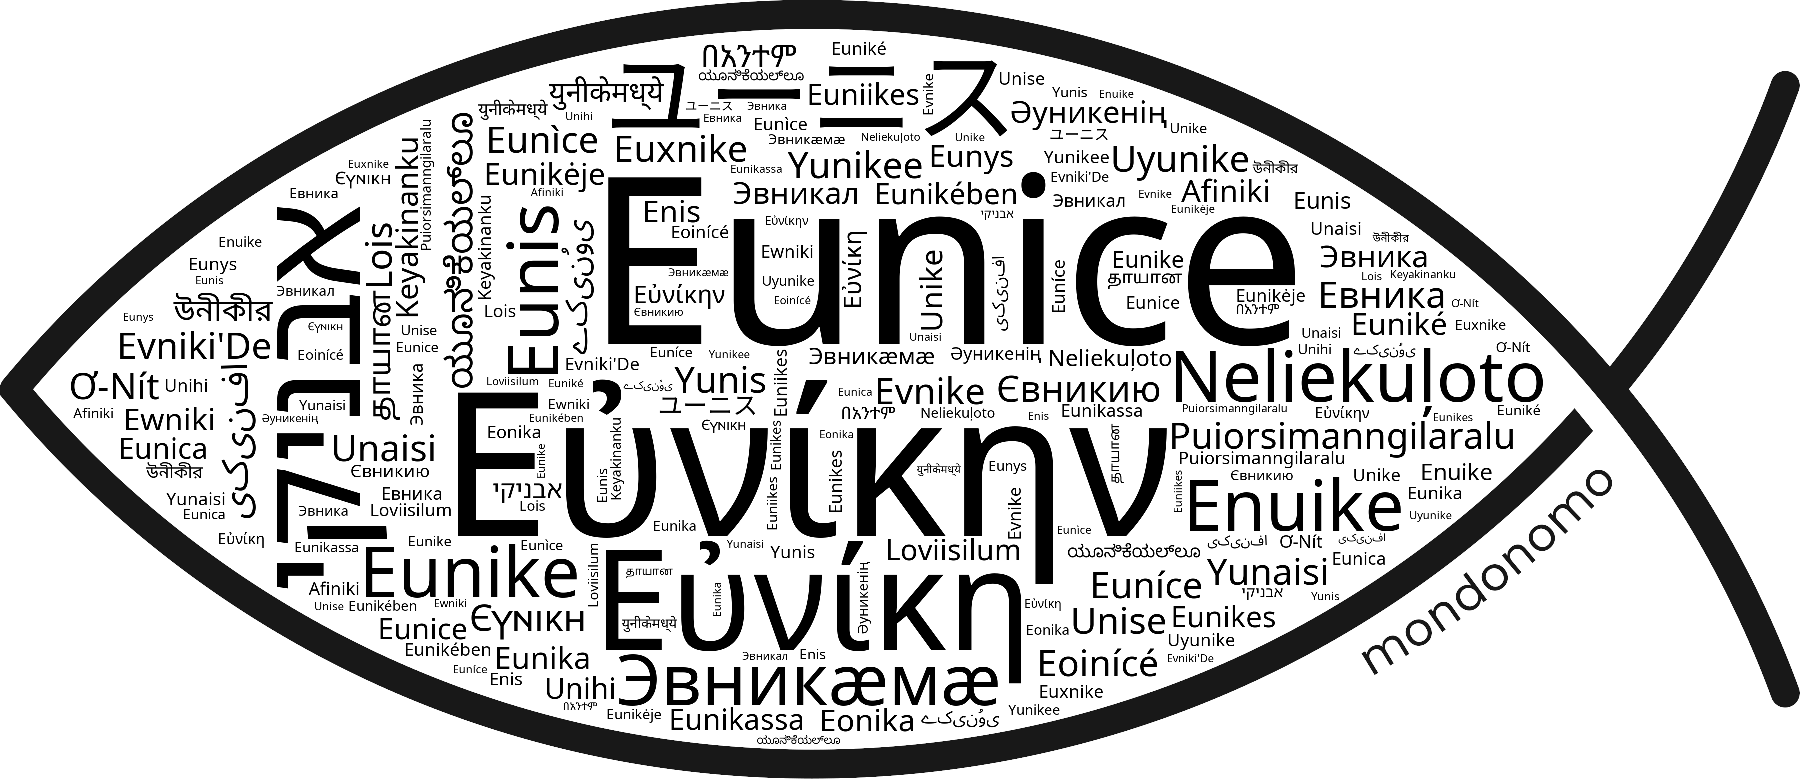 Name Eunice in the world's Bibles